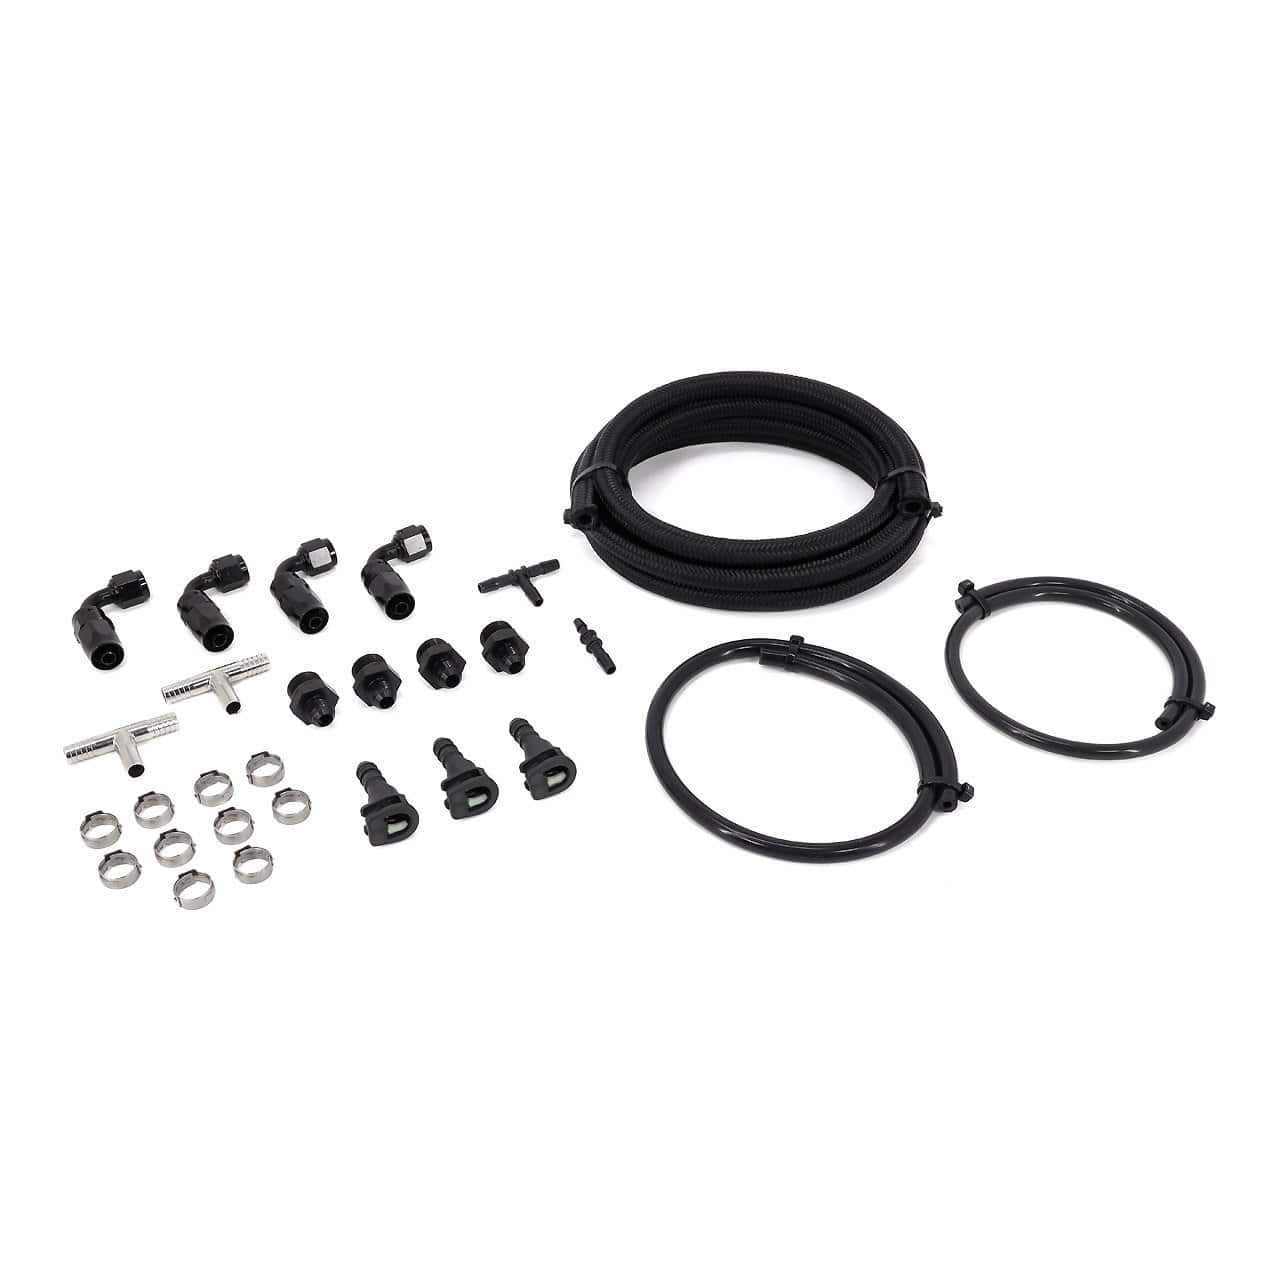 IAG Braided Fuel Line & Fitting Kit for IAG Top Feed Fuel Rails & OEM FPR for 02-07 WRX 2007 STI Only.